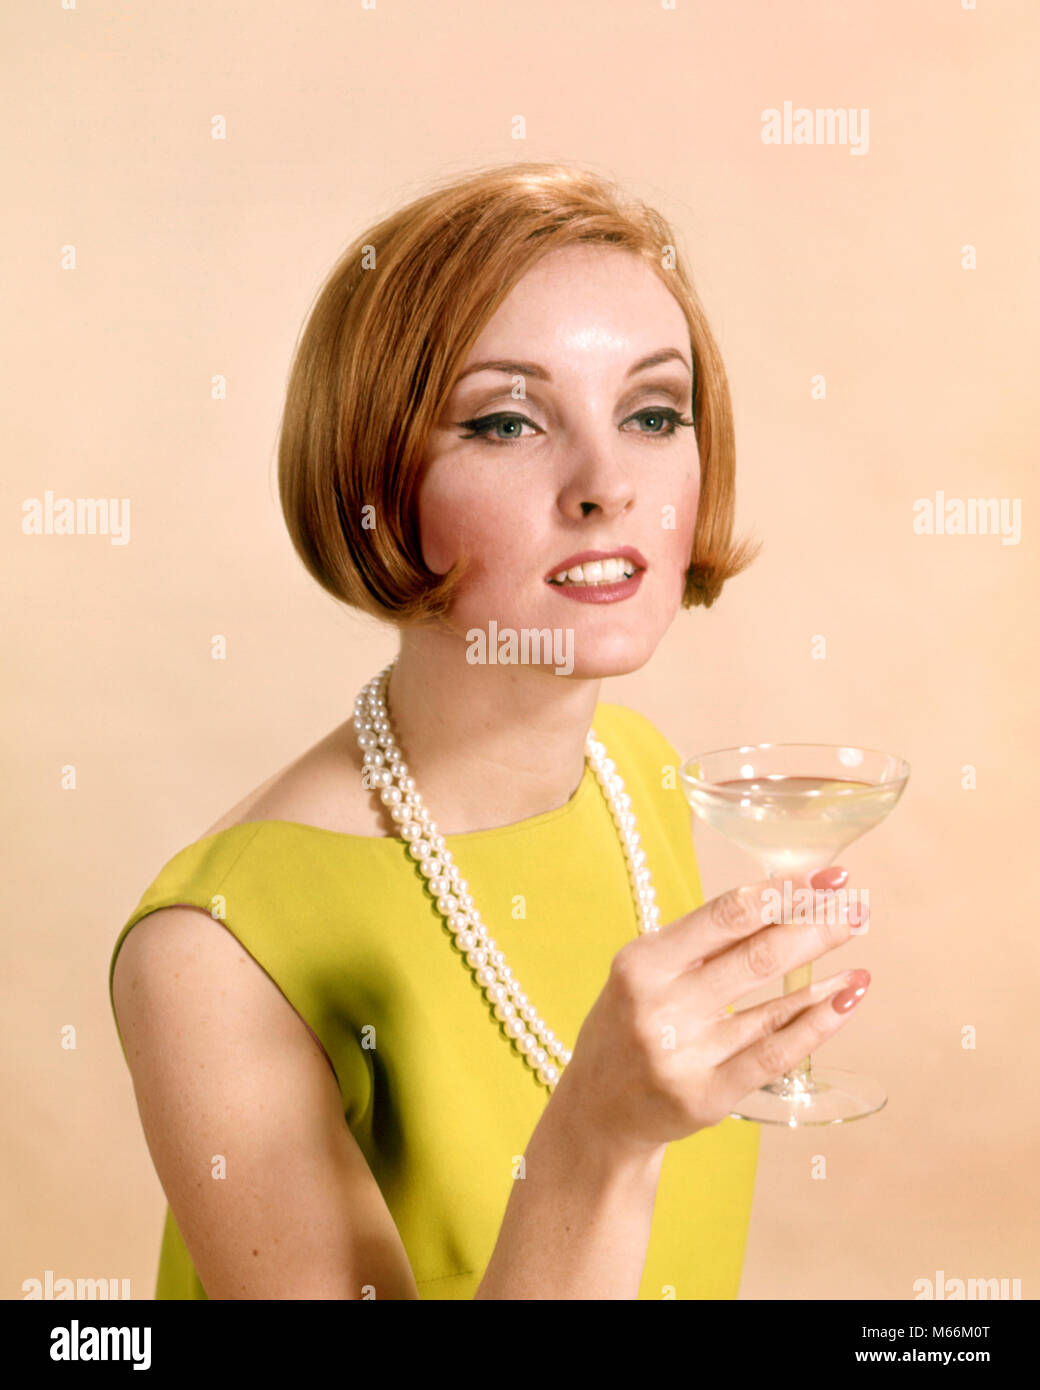 1960s PRETTY WOMAN RED HAIR LIME GREEN DRESS PEARL NECKLACE TOASTING WITH CHAMPAGNE GLASS - kf4586 HAR001 HARS GROWN-UP INDOORS MARTINI NOSTALGIA 20-25 YEARS 25-30 YEARS SINGLE OBJECT PRETTY COSMETICS BEVERAGE STYLES TOAST STRATEGY FLUID HAIRSTYLE TOASTING FASHIONS MID-ADULT MID-ADULT WOMAN PAGEBOY CAUCASIAN ETHNICITY CITRUS FRUIT EYE MAKEUP GOOD TEETH LIME OLD FASHIONED PERSONS Stock Photo